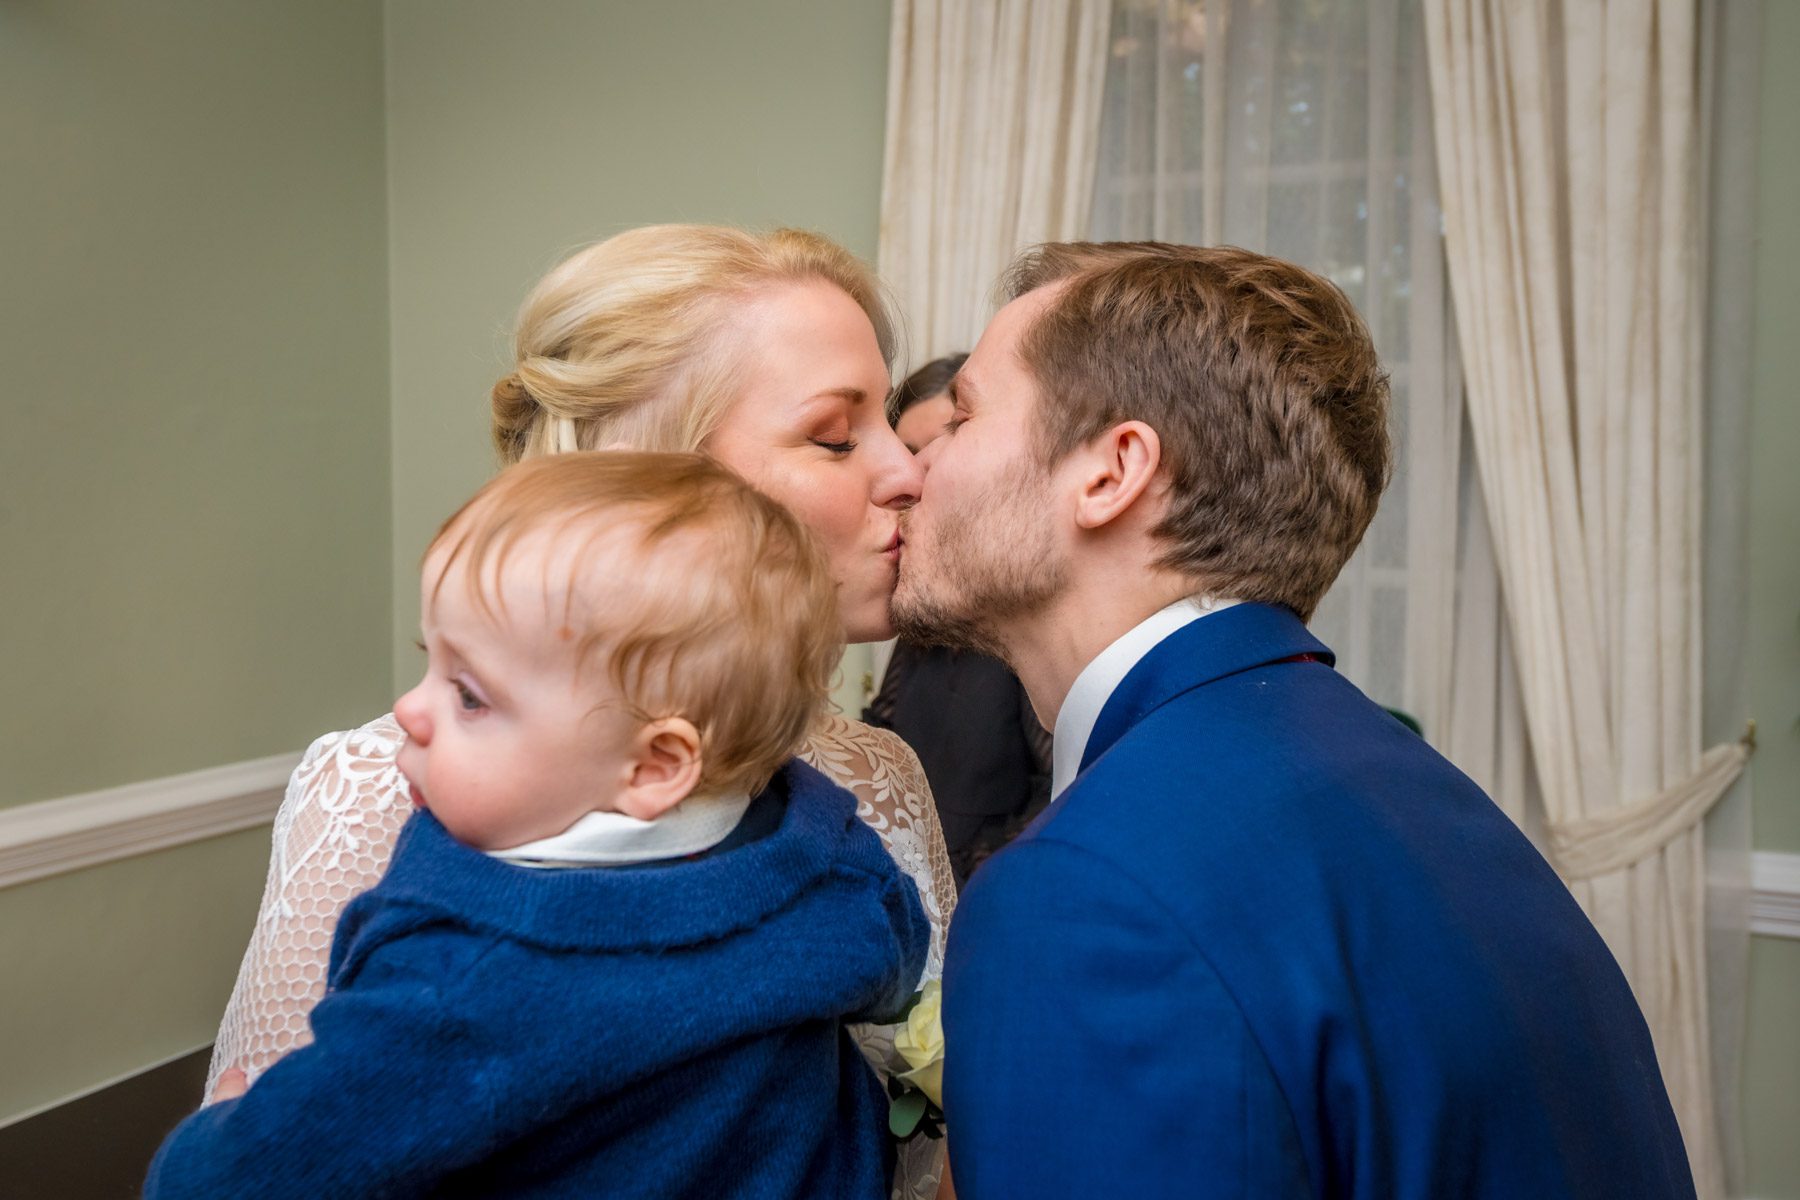 The couple kiss whilst carrying their baby at York House wedding in London.